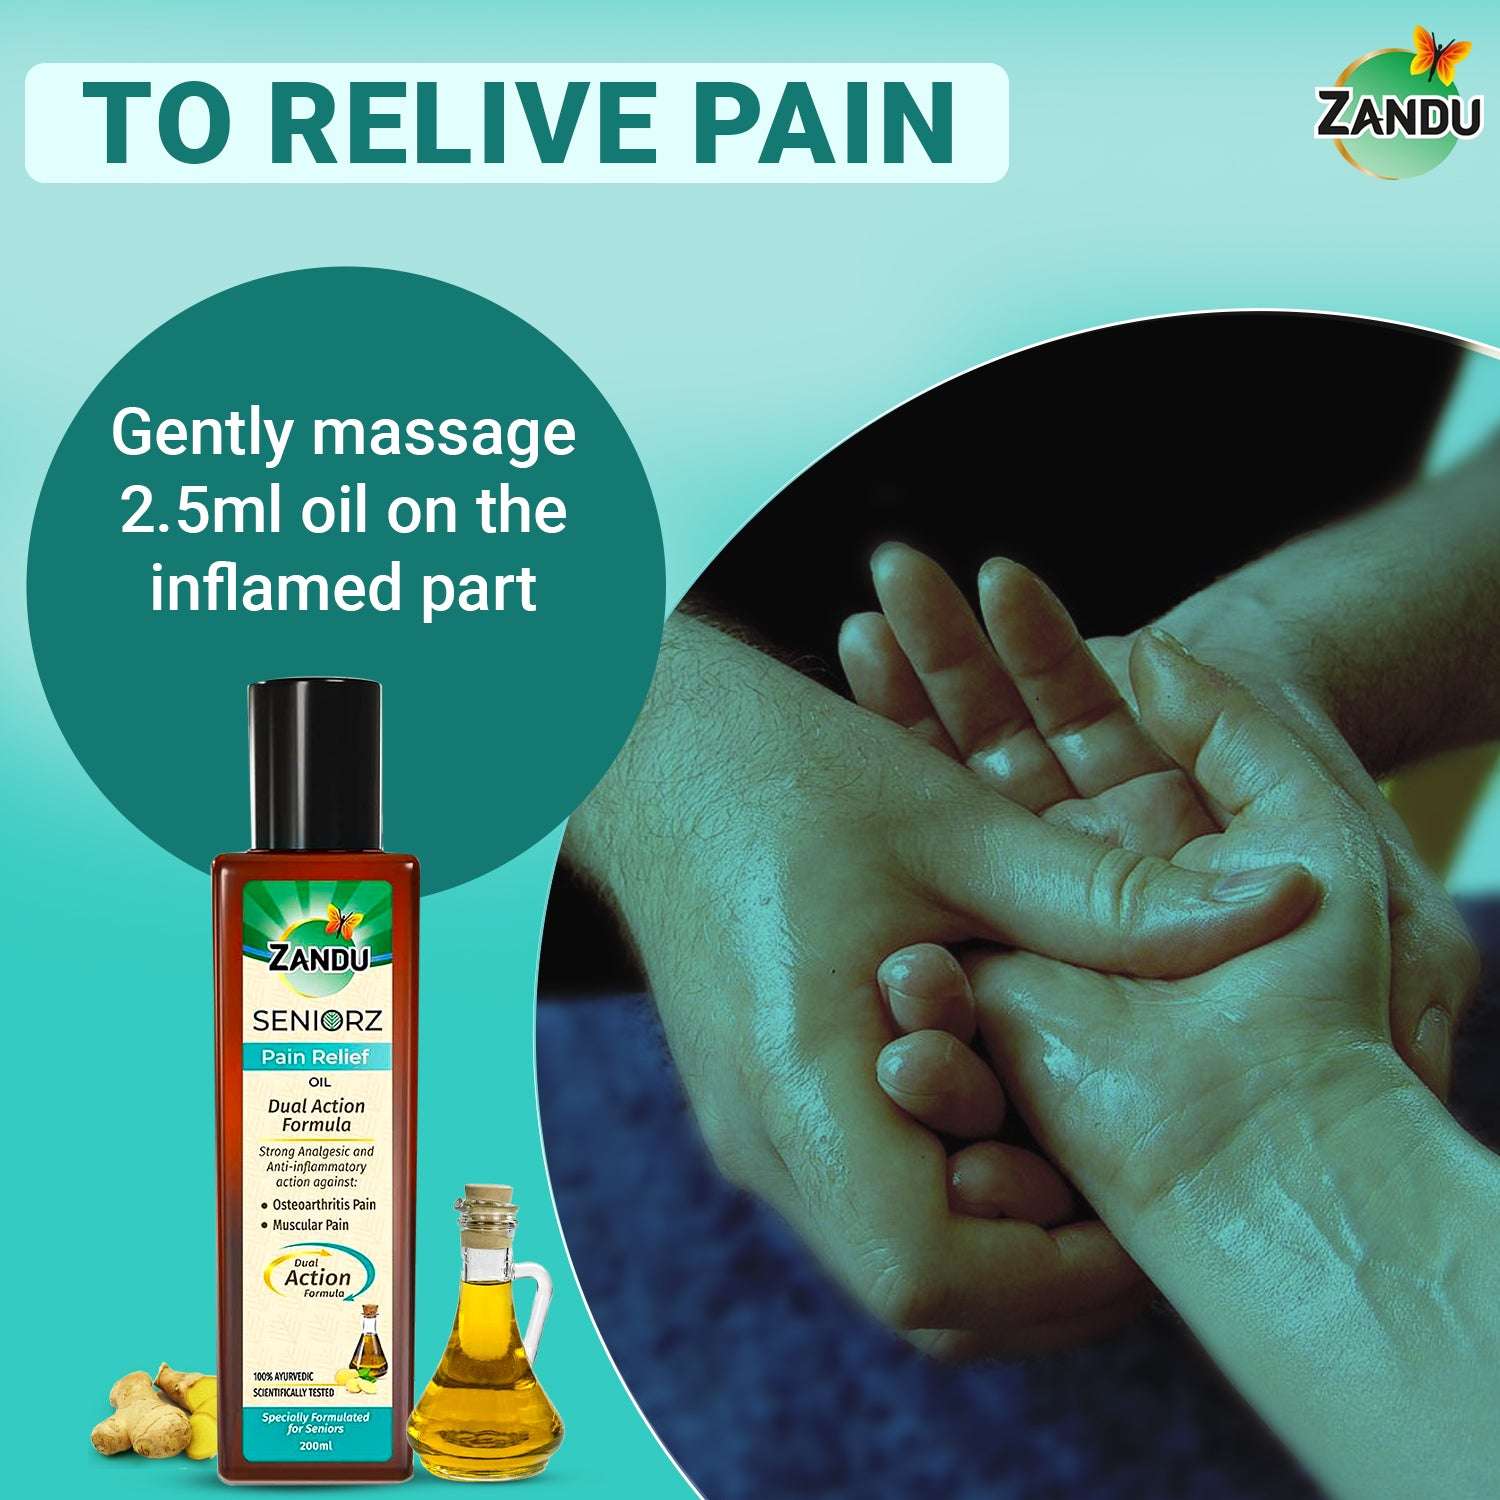 Seniorz Pain Relief Oil for Senior Citizens - Cures Muscle, Joint & Knee Pain (200ml)